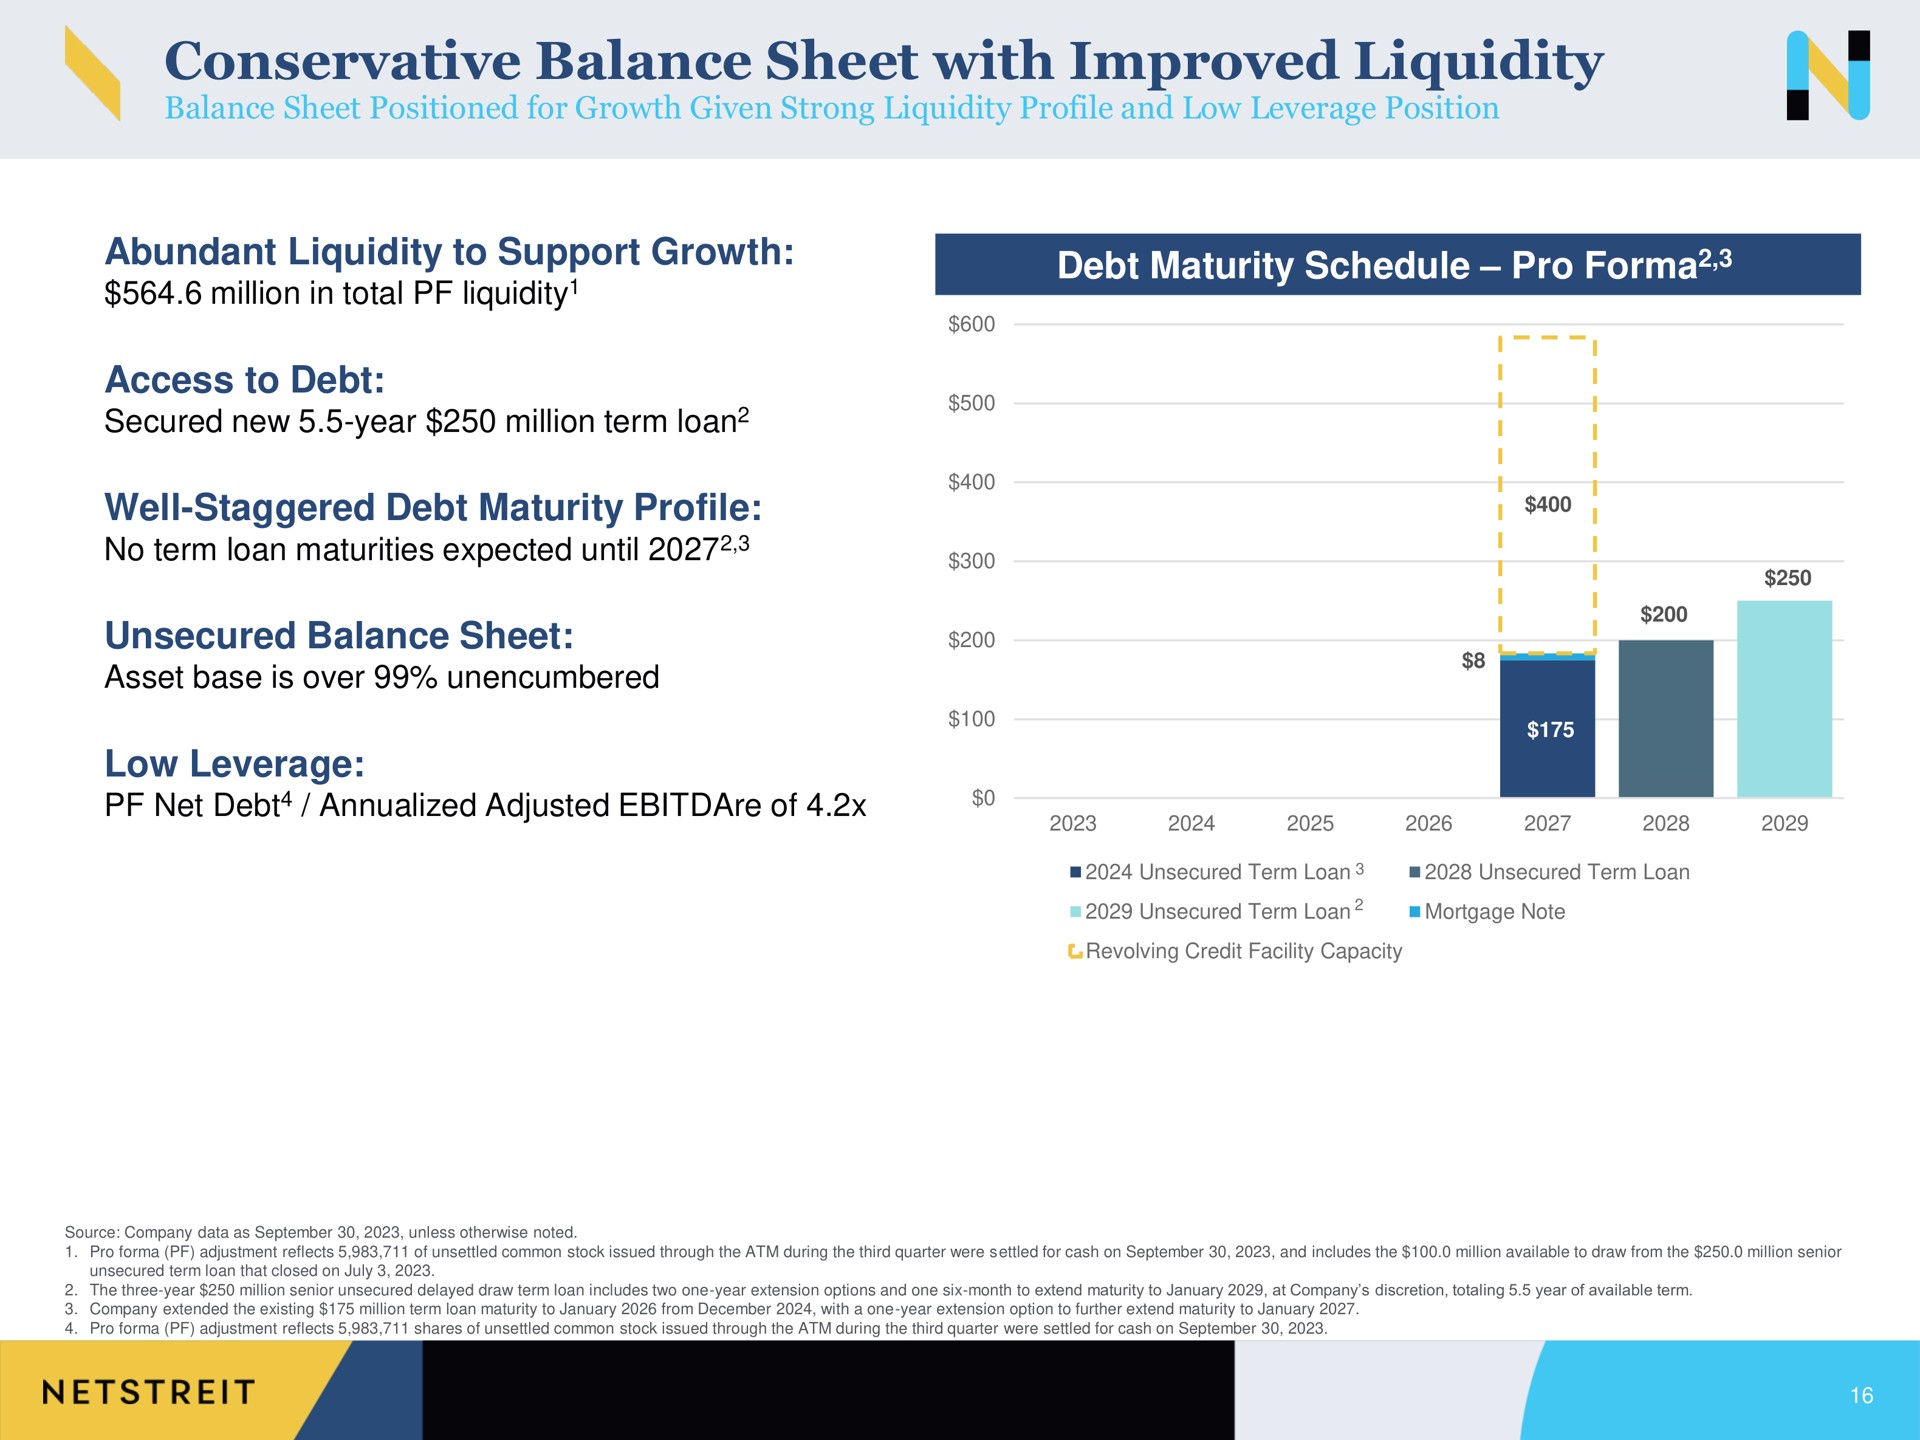 conservative balance sheet with improved liquidity abundant liquidity to support growth debt maturity schedule pro access to debt well staggered debt maturity profile unsecured balance sheet low leverage | Netstreit